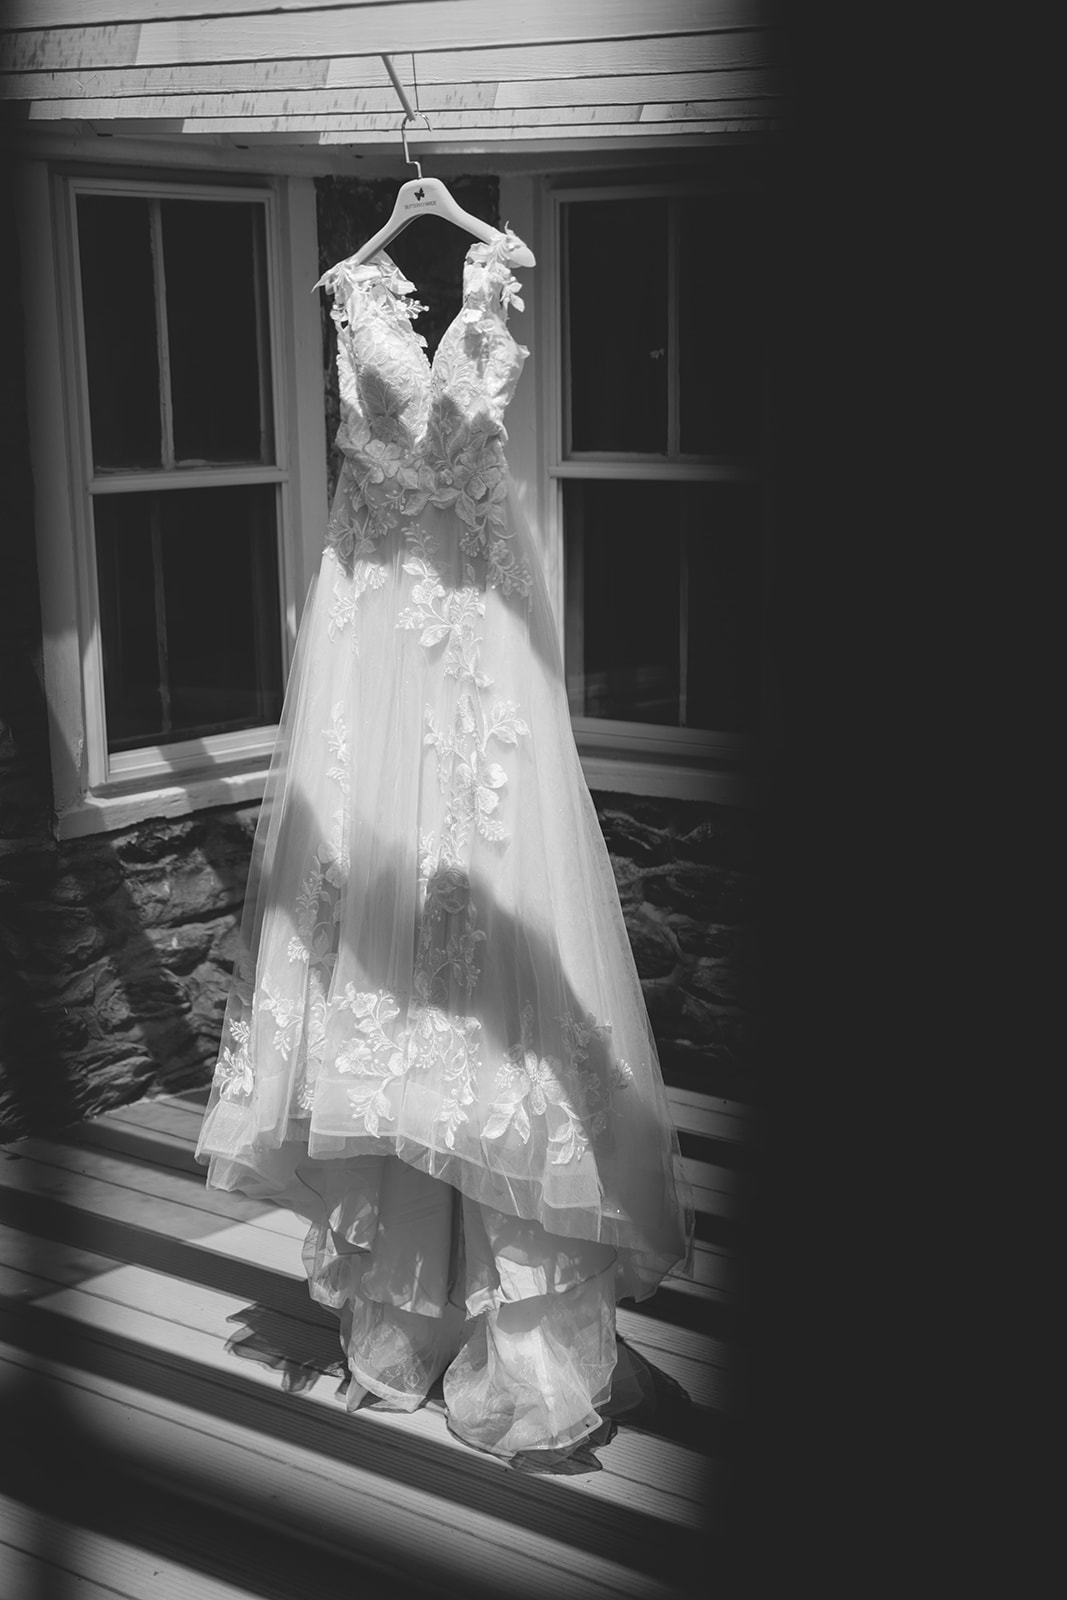 The wedding dress hangs on the balcony in dramatic shadows